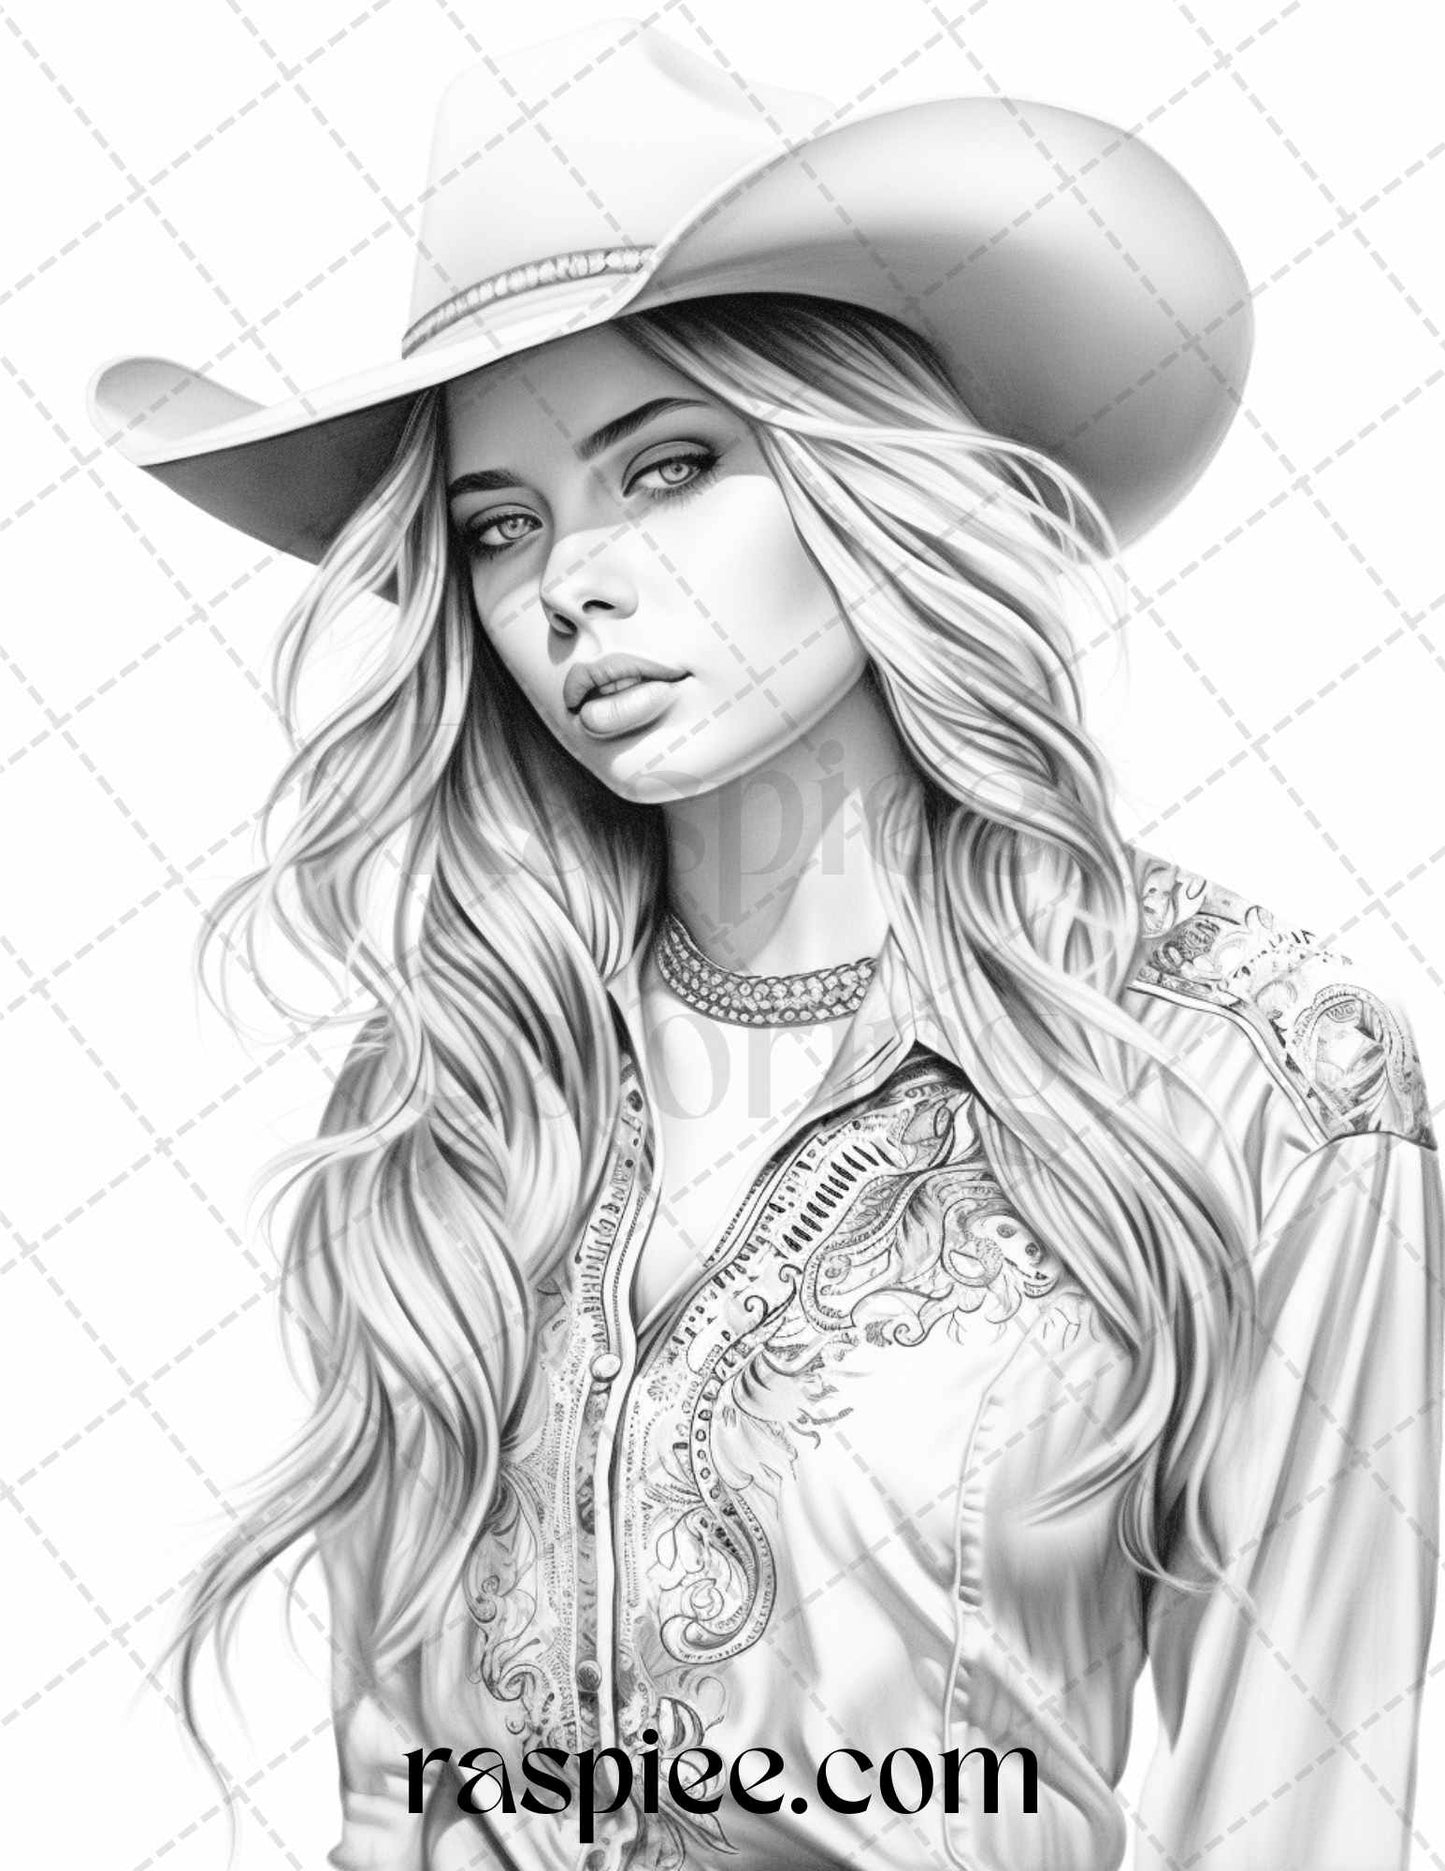 40 Beautiful Cowgirls Grayscale Coloring Pages Printable for Adults, PDF File Instant Download - raspiee